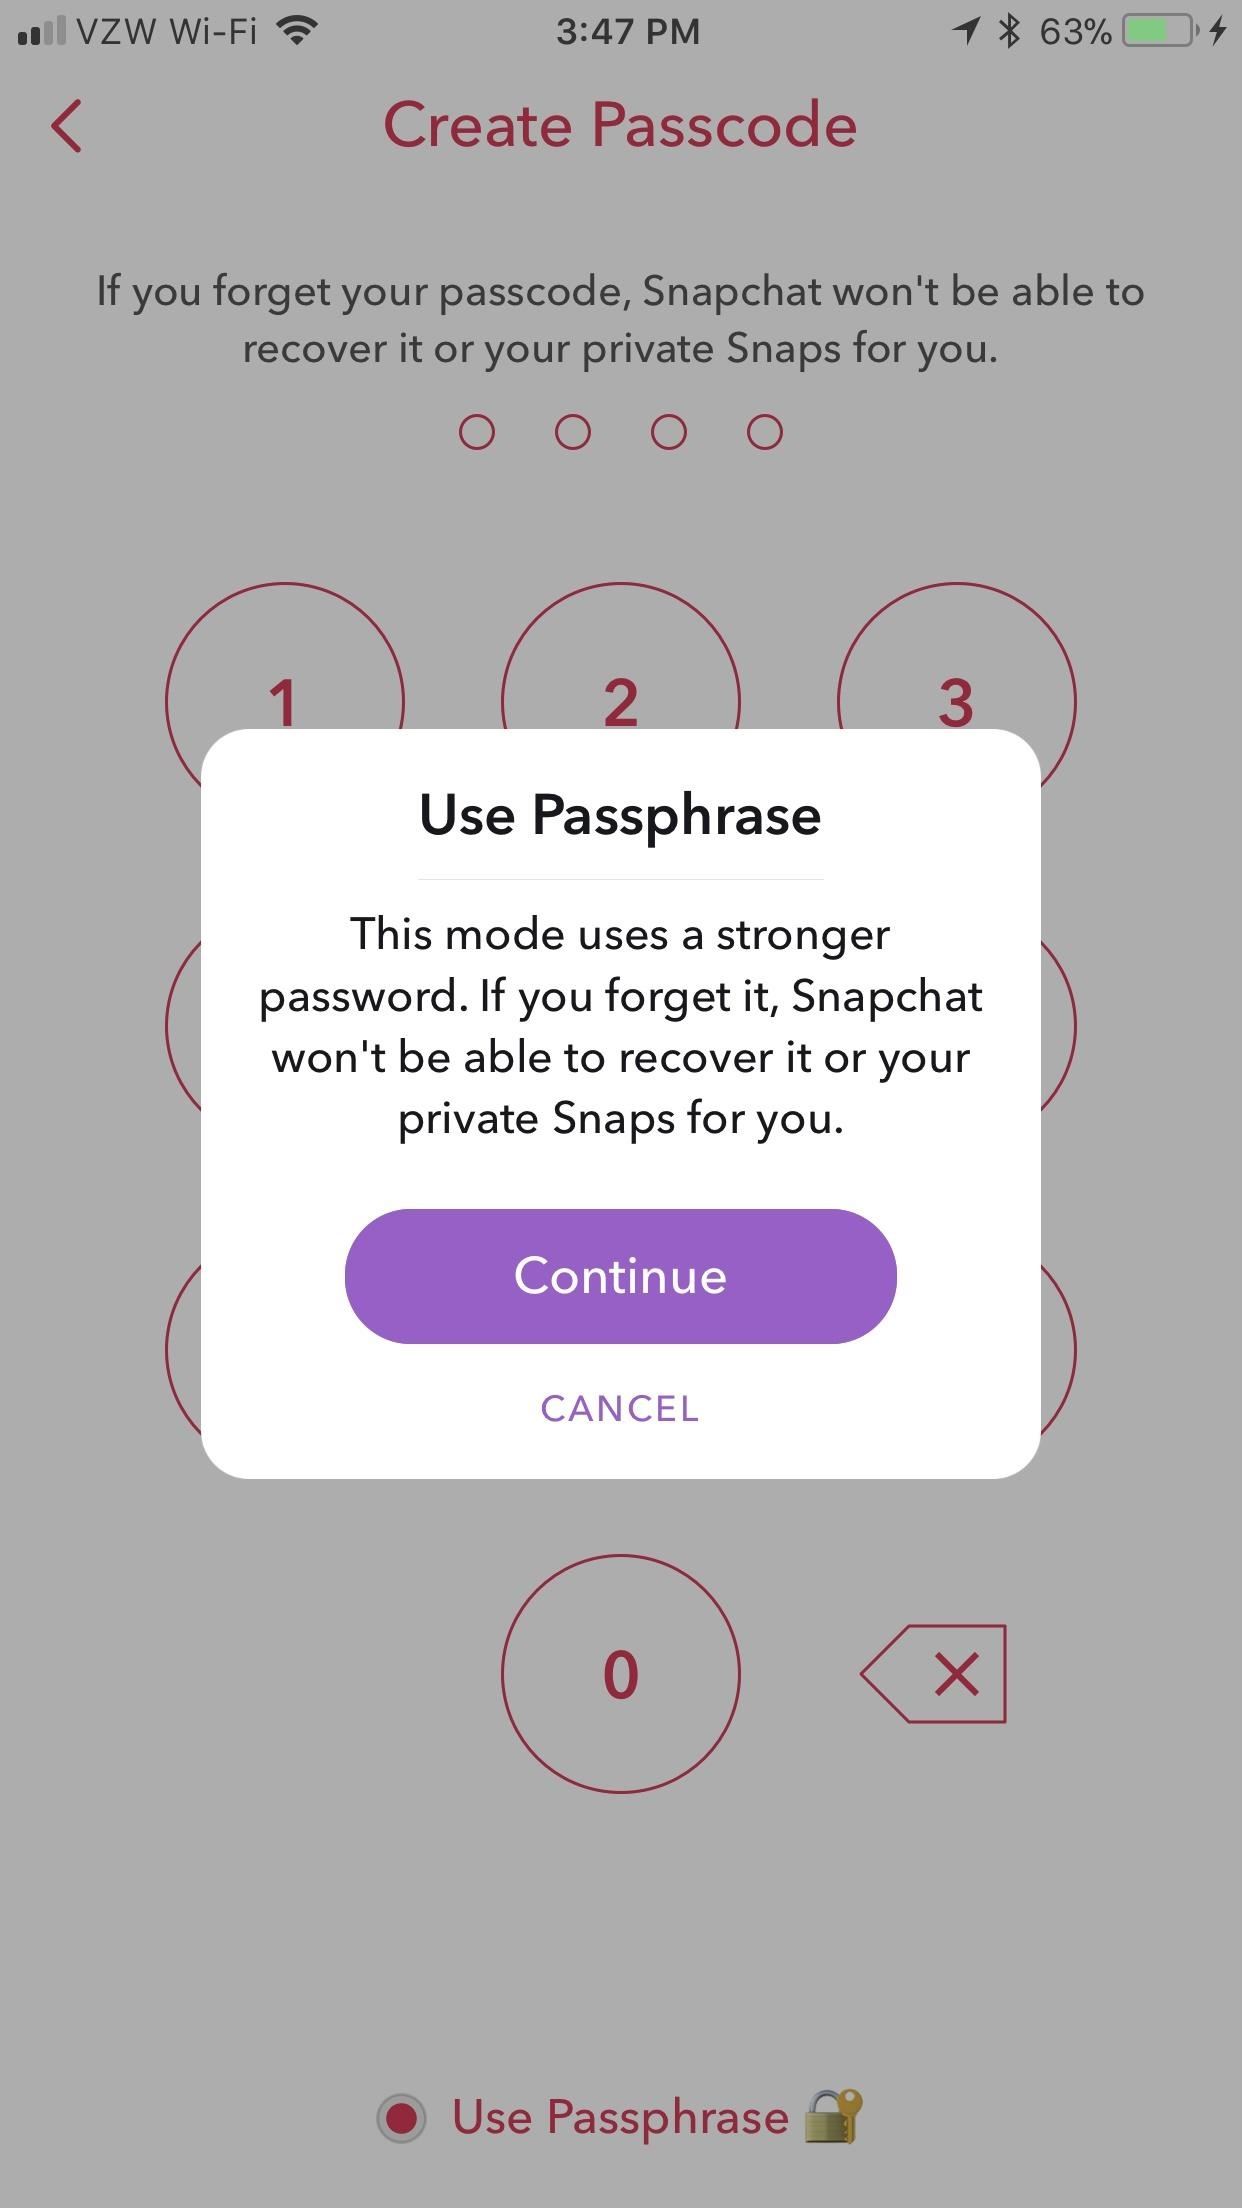 Snapchat 101: How to Use Memories to Save Snaps, Edit Old Snaps & More